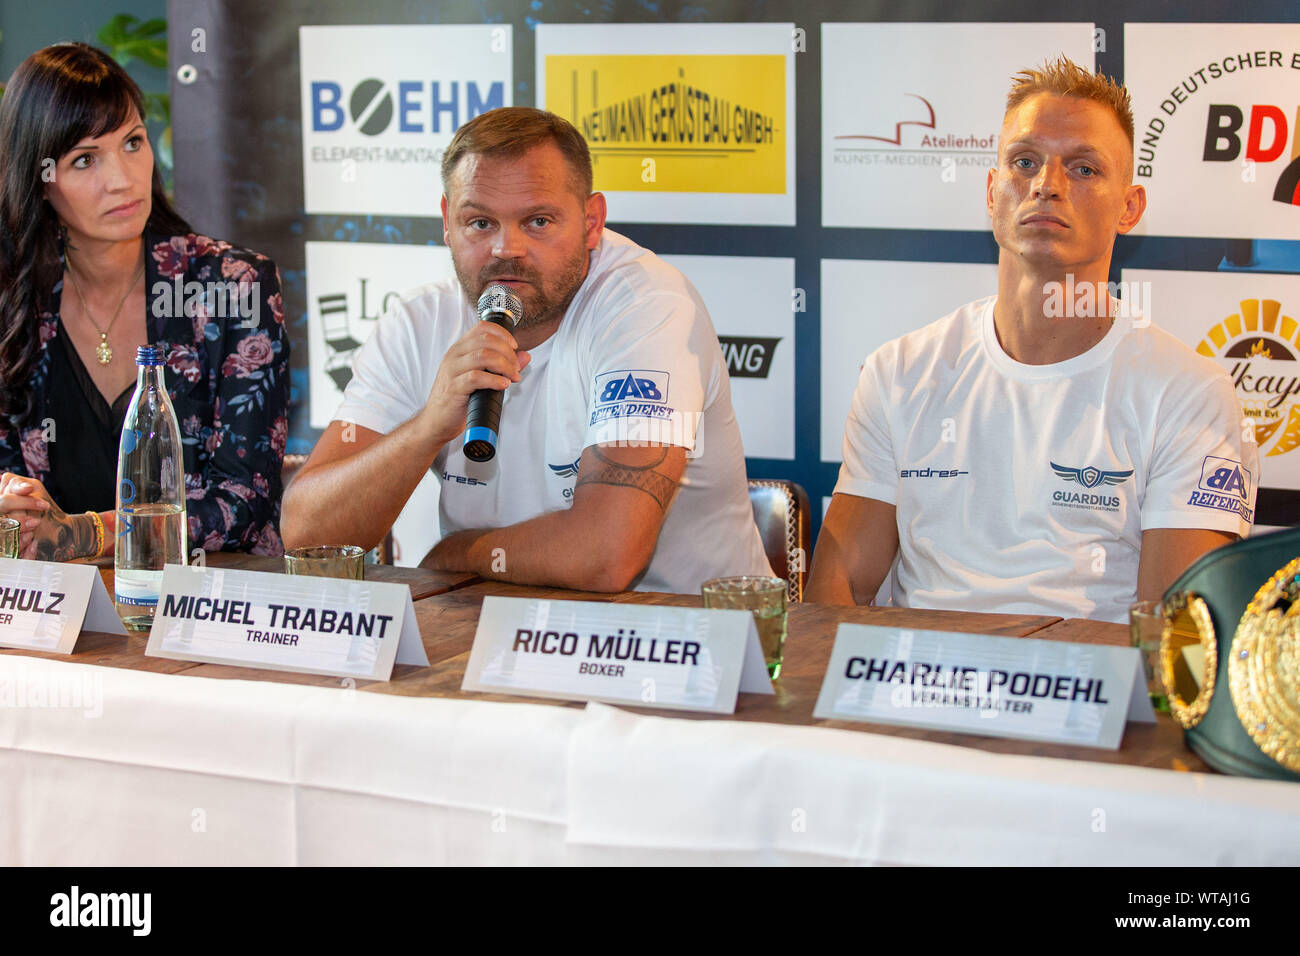 Berlin, Germany. 11th Sep, 2019. Boxing: Superlightweight, World Championship, press conference before the IBO World Championship: Müller (Germany) - Ponce (Argentina) in the Loretta at the Spree. Organizer Steffi Schulz (l-r), trainer Michel Trabant and boxer Rico Müller are at the press conference. Credit: Andreas Gora/dpa/Alamy Live News Stock Photo